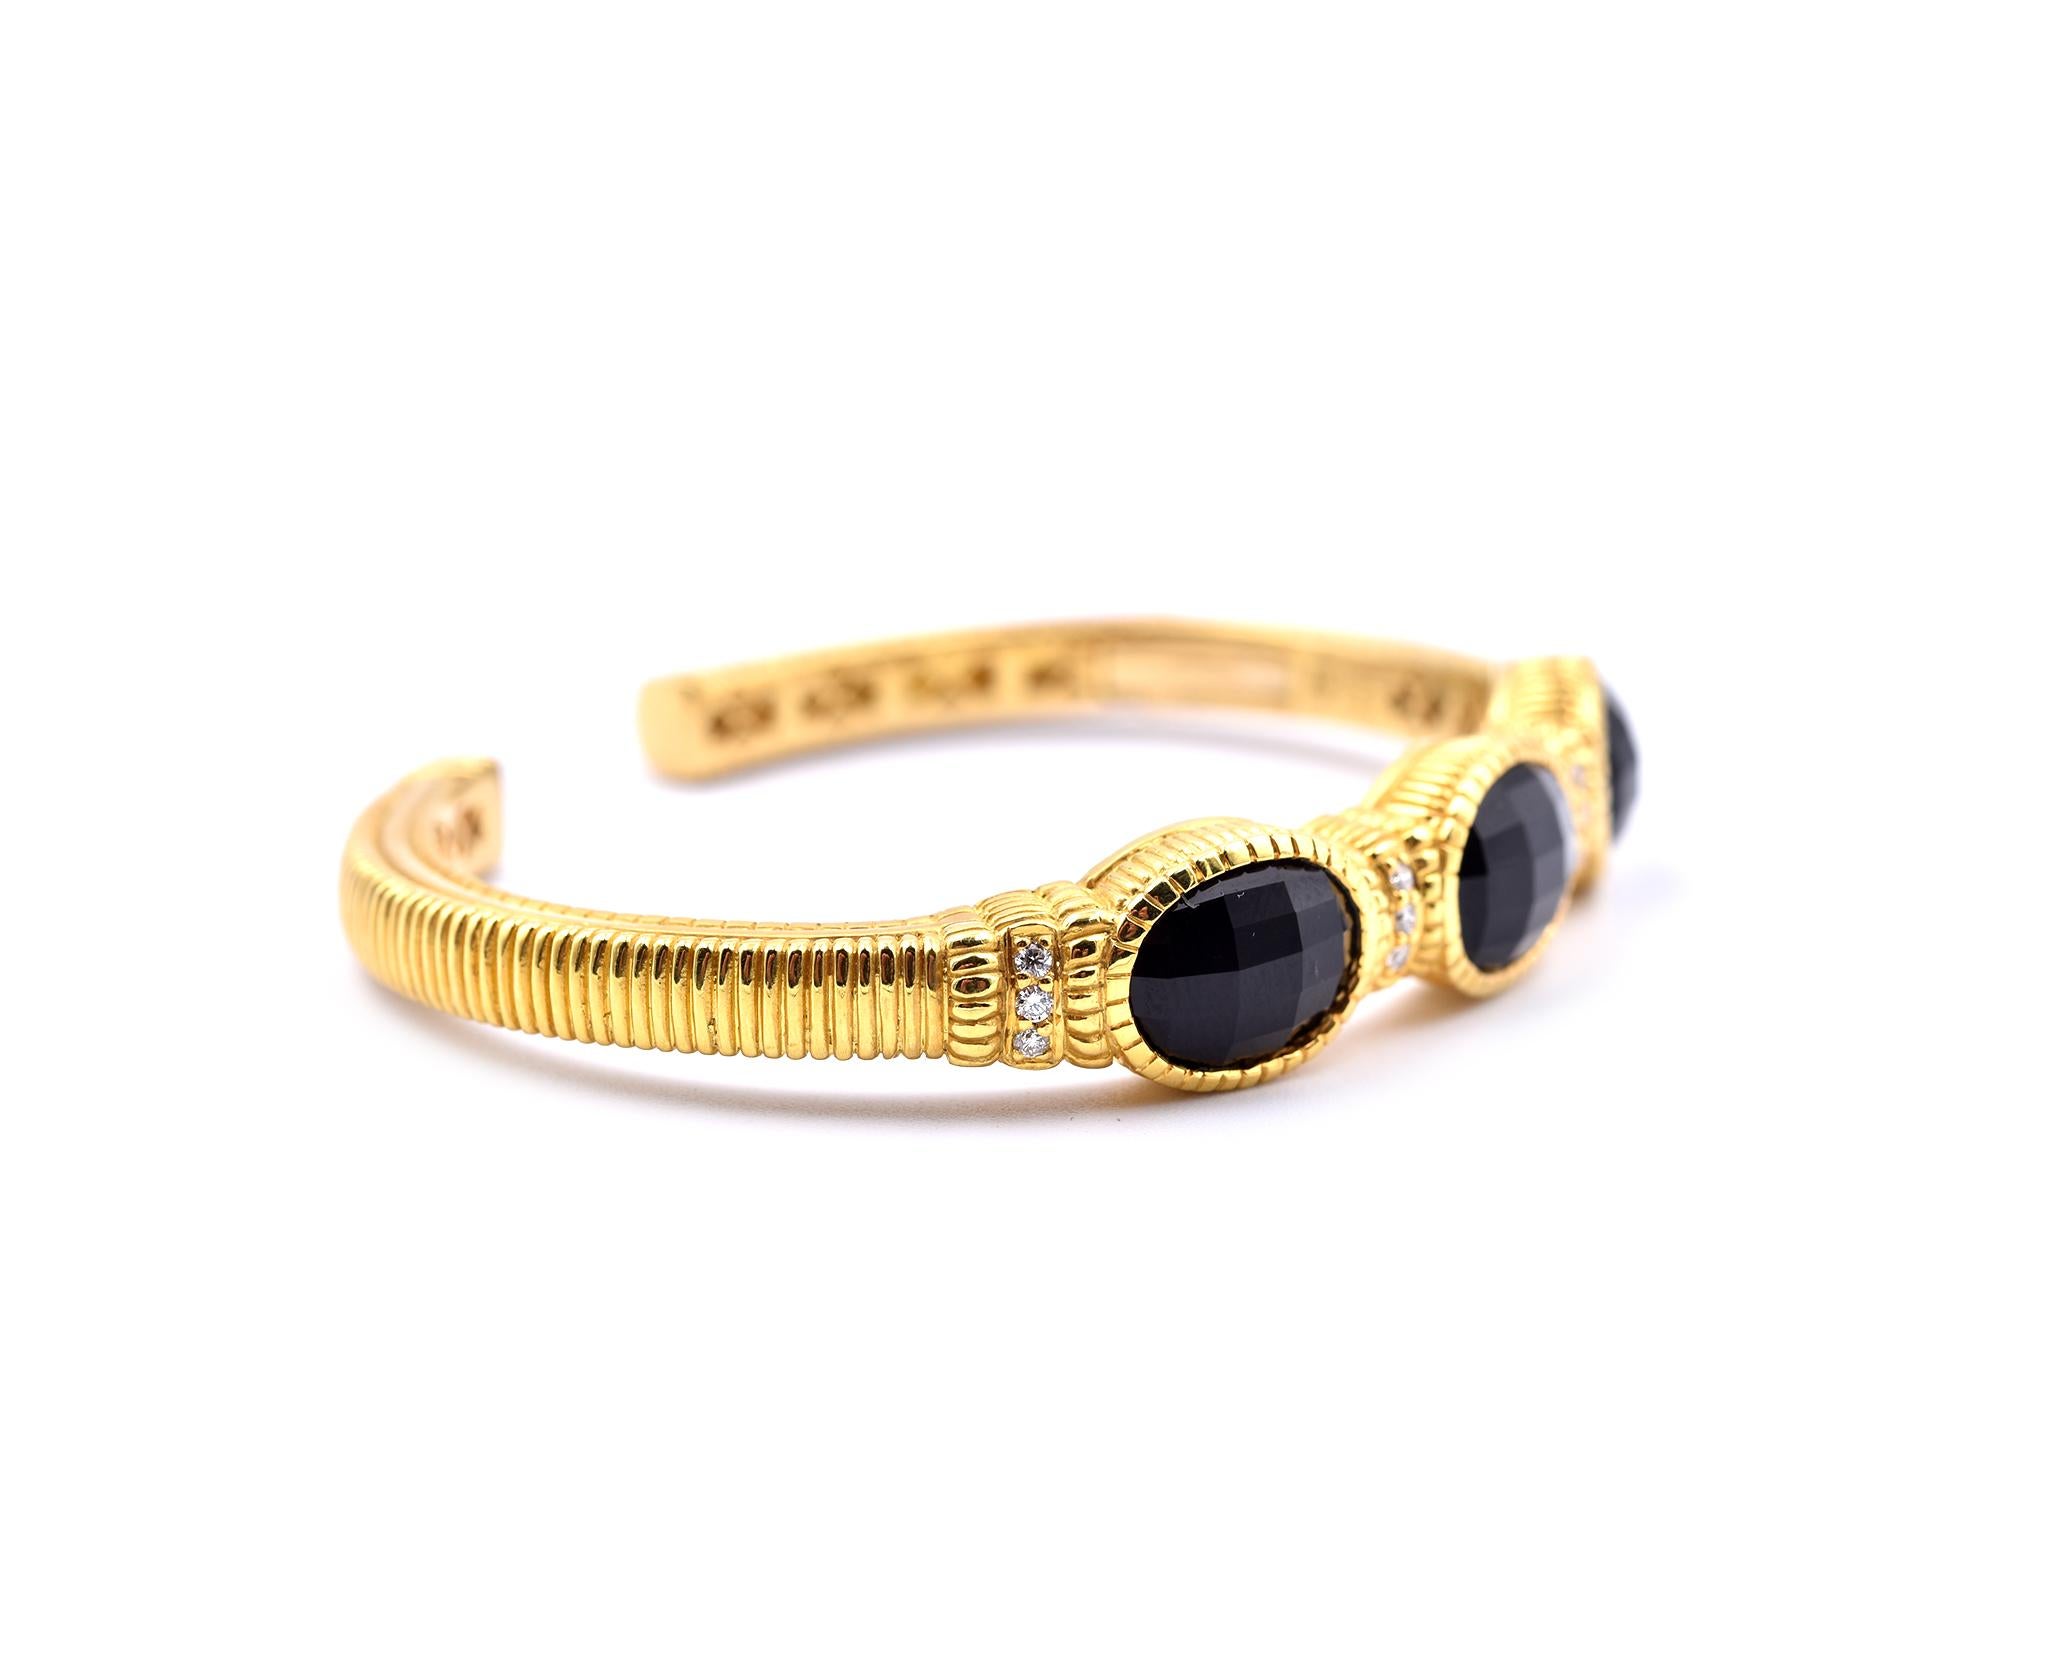 Designer: Judith Ripka
Material: 18k yellow gold
Diamonds: 12 round brilliant cut=0.25cttw
Color: G
Clarity: VS
Dimensions: bangle will fit a 6 ½-inch wrist and it is 3.92mm wide
Weight: 33.55 grams
